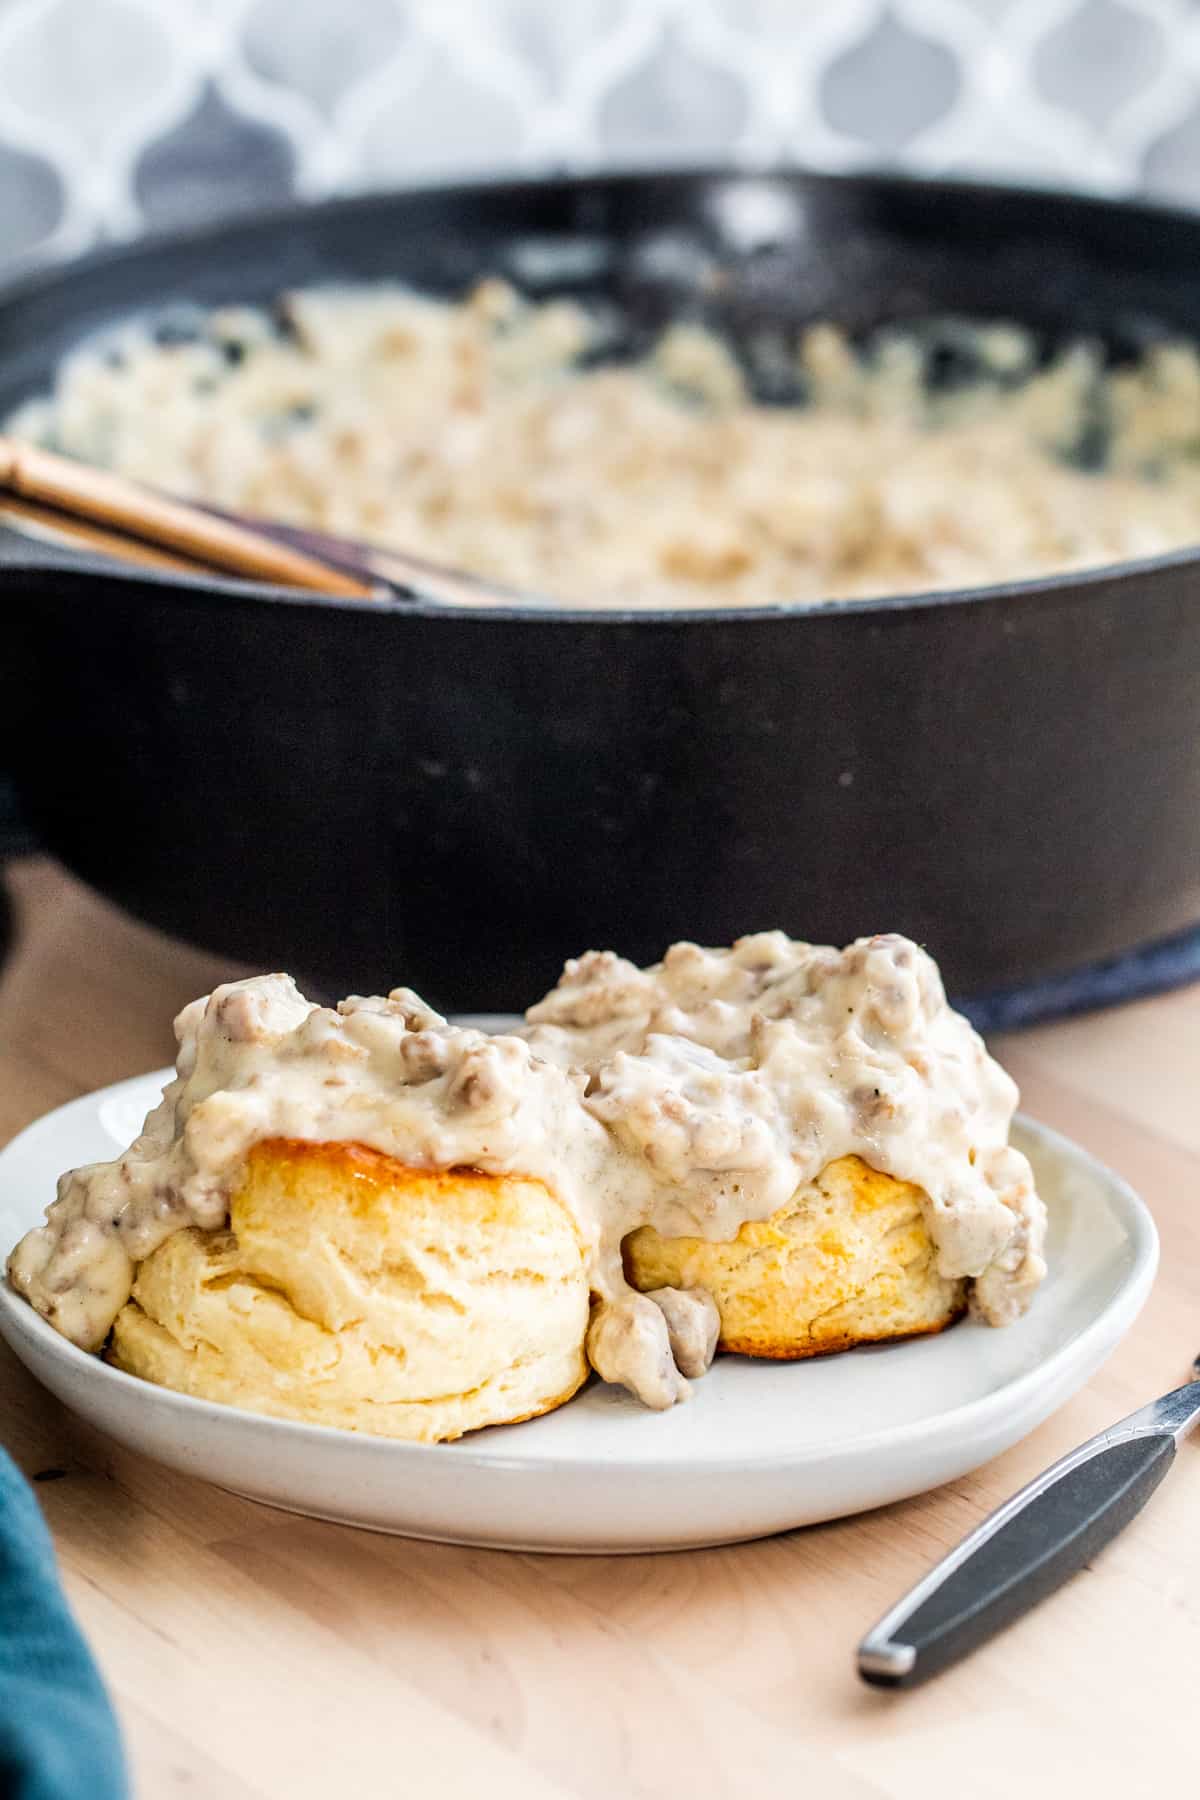 Two biscuits topped with gravy on a gray plate with skillet of gravy in background.